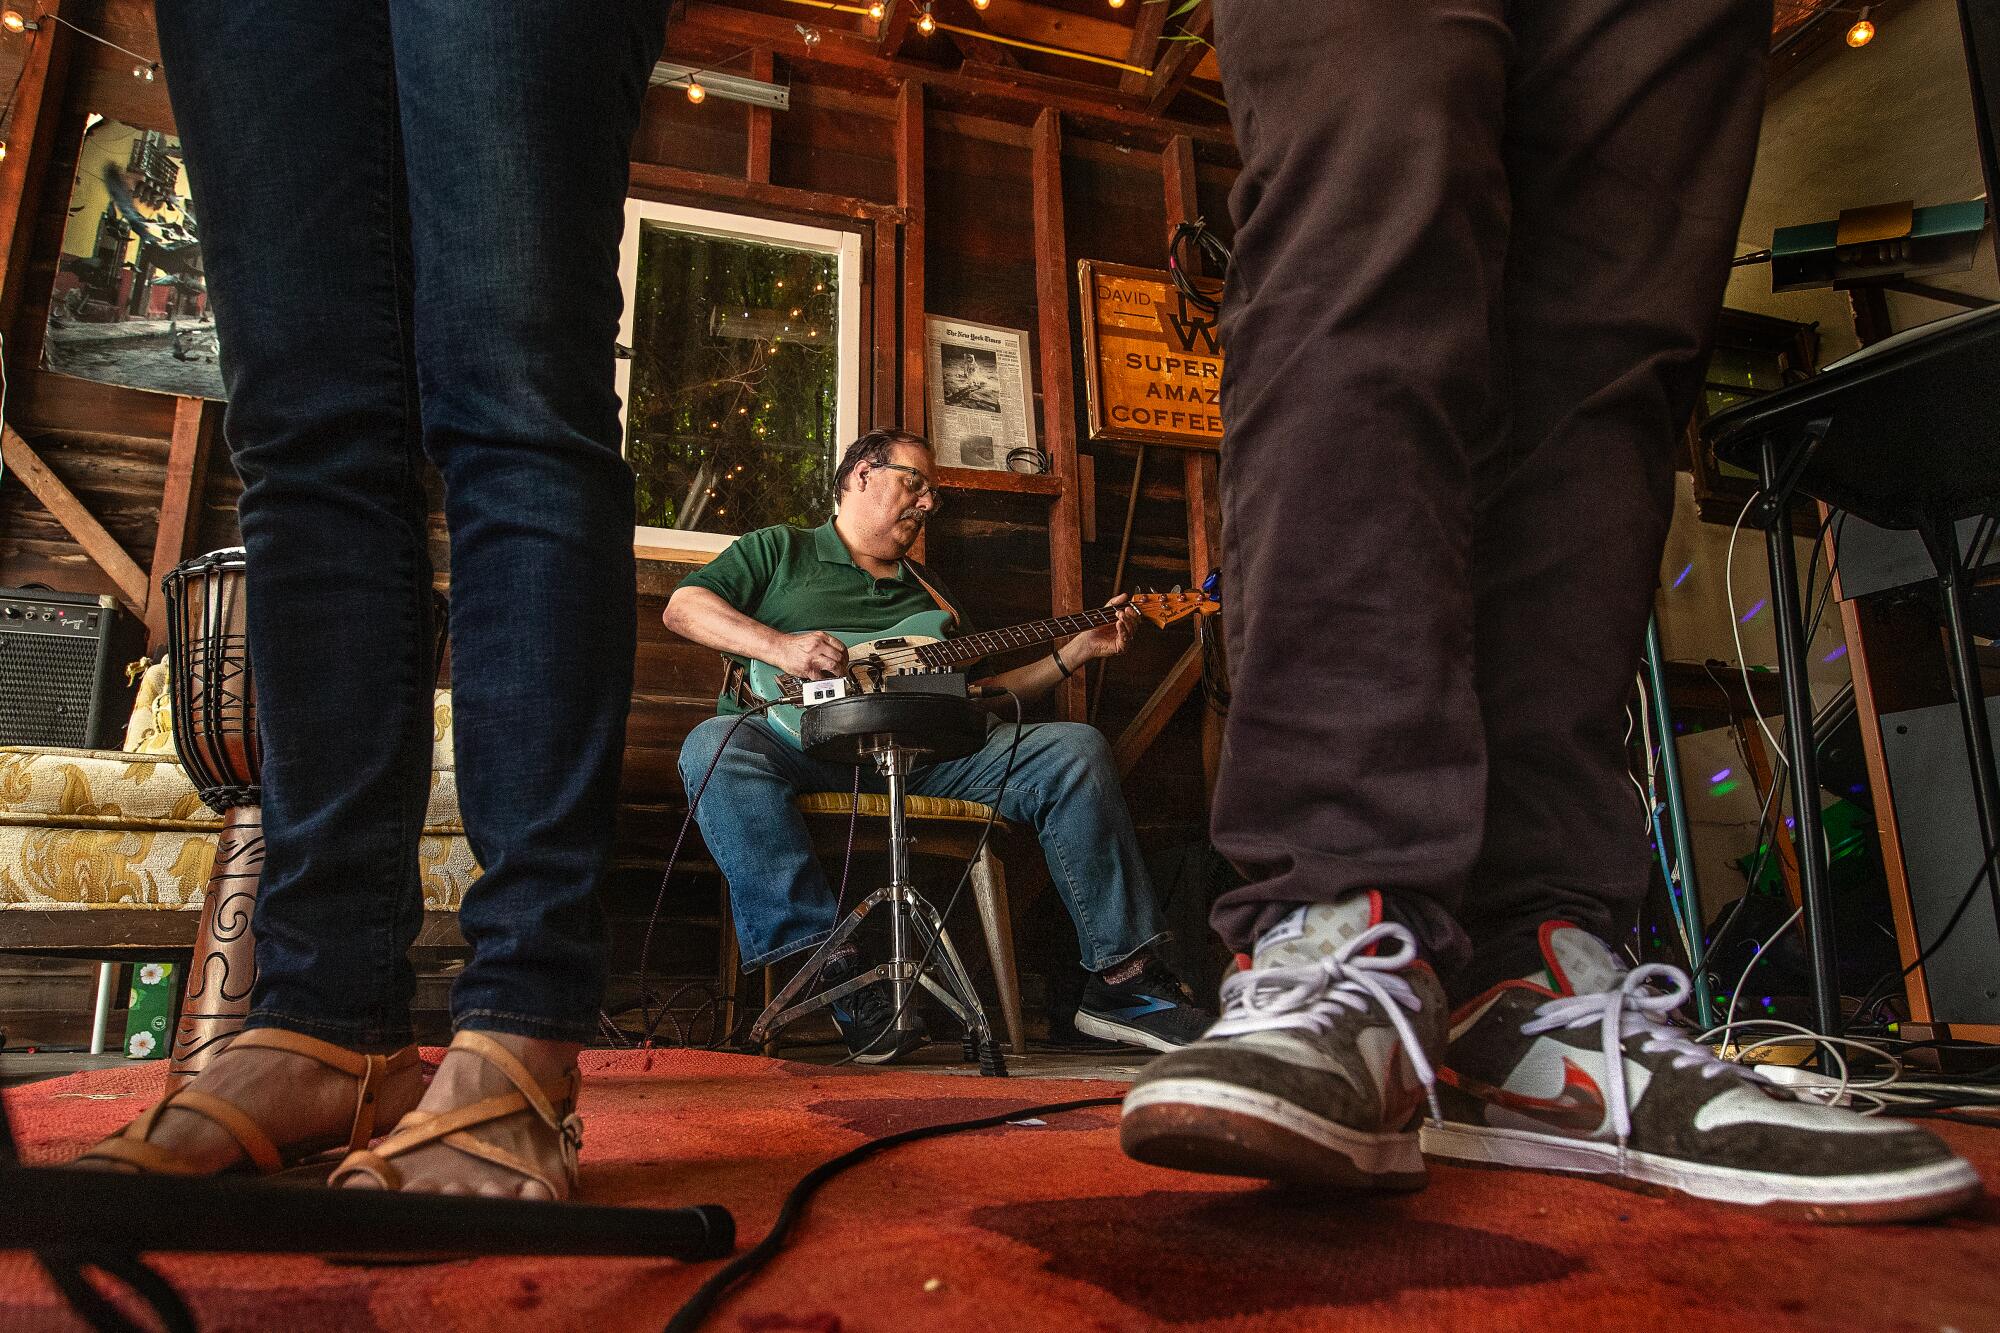 A man playing the guitar is visible between two pairs of feet on the floor.